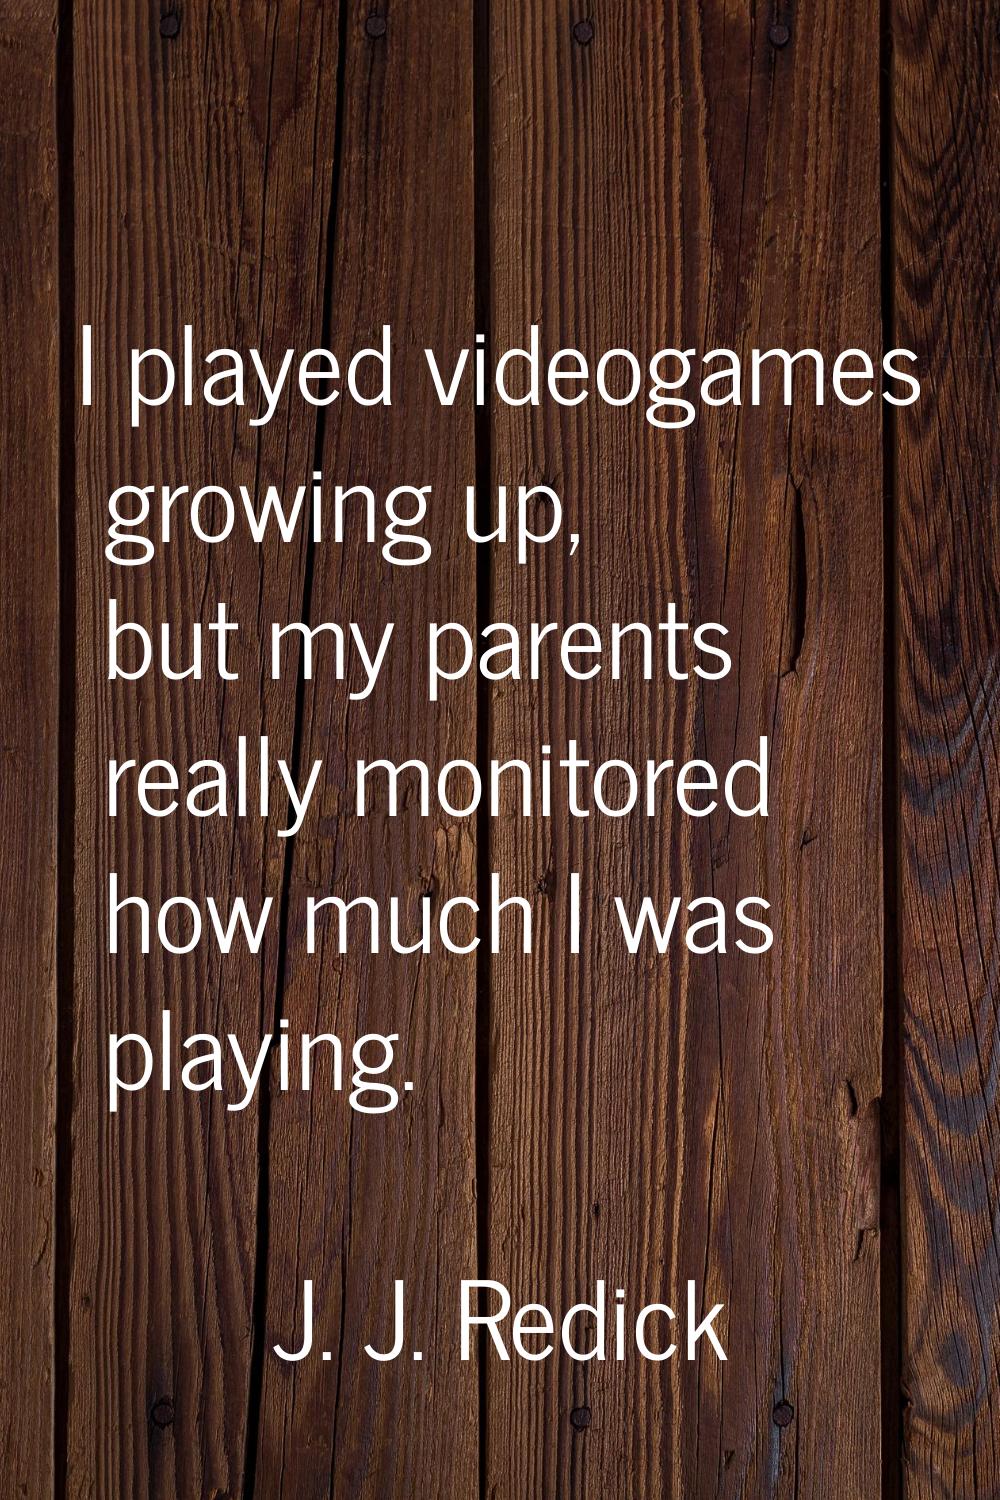 I played videogames growing up, but my parents really monitored how much I was playing.